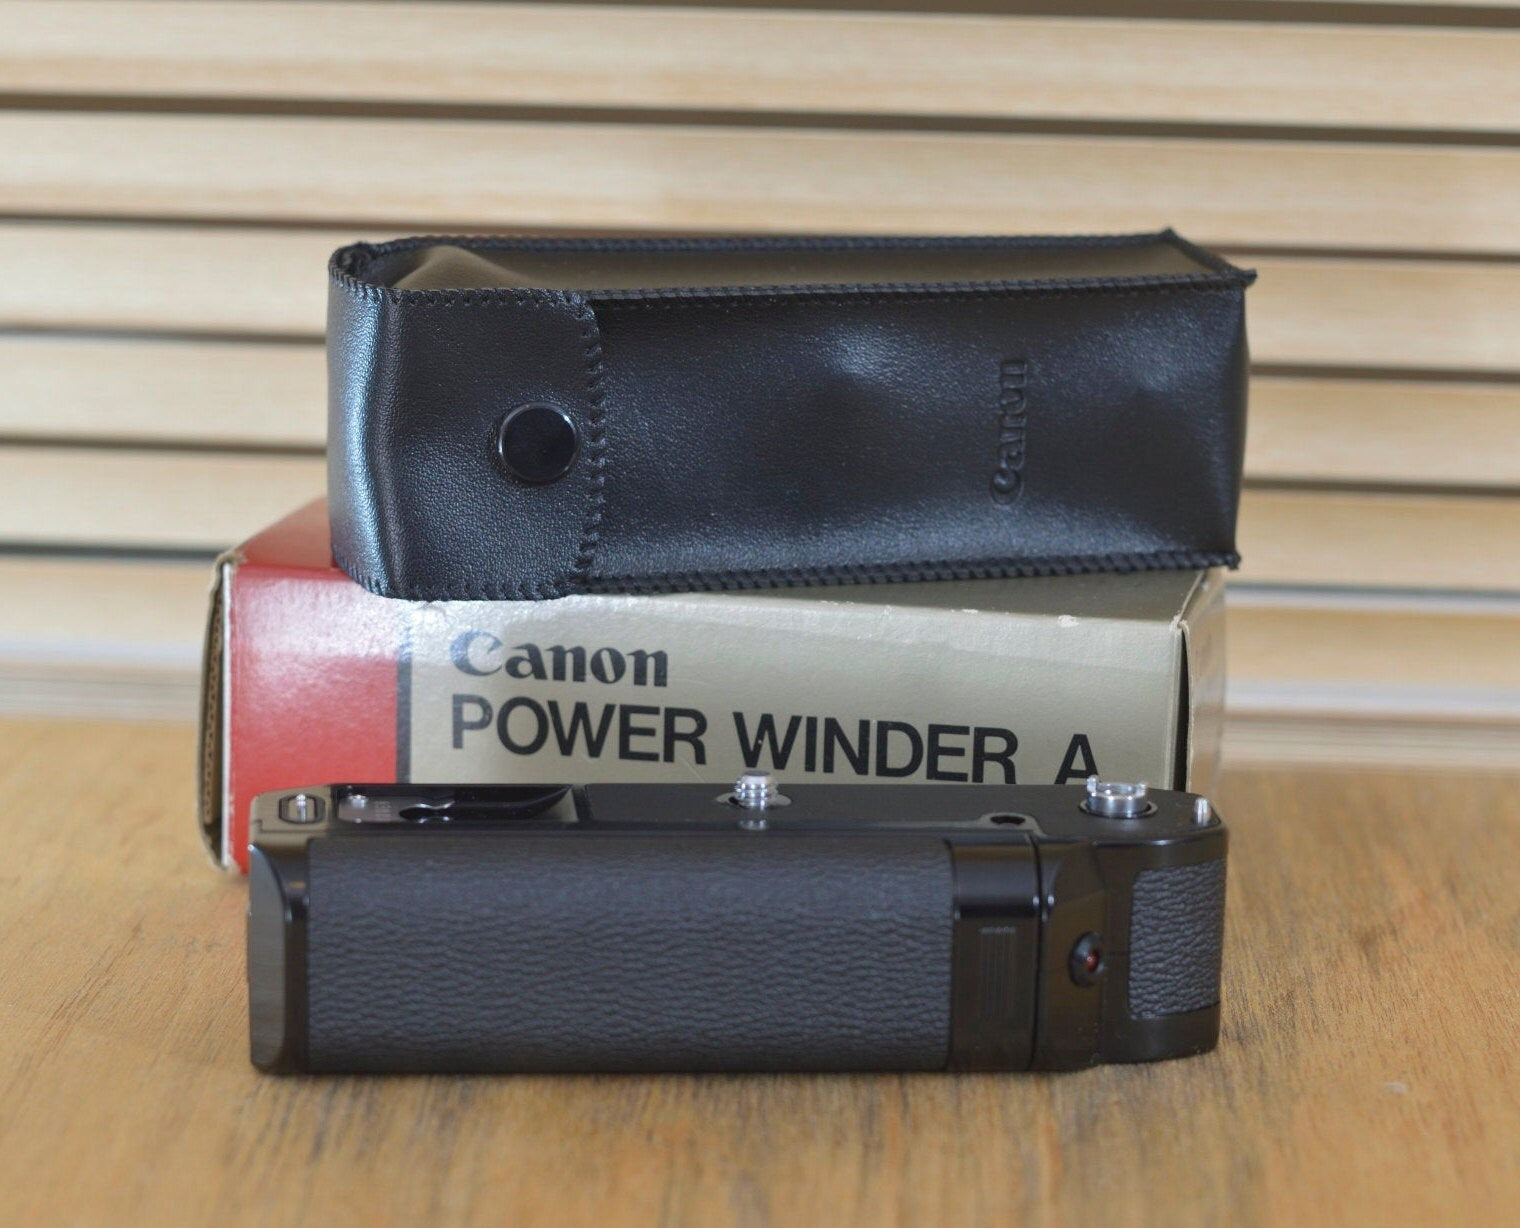 Canon power winder 'A' in case and box, beautiful condition and these look fantastic on your vintage Canon camera. Lovely addition - RewindCameras quality vintage cameras, fully tested and se